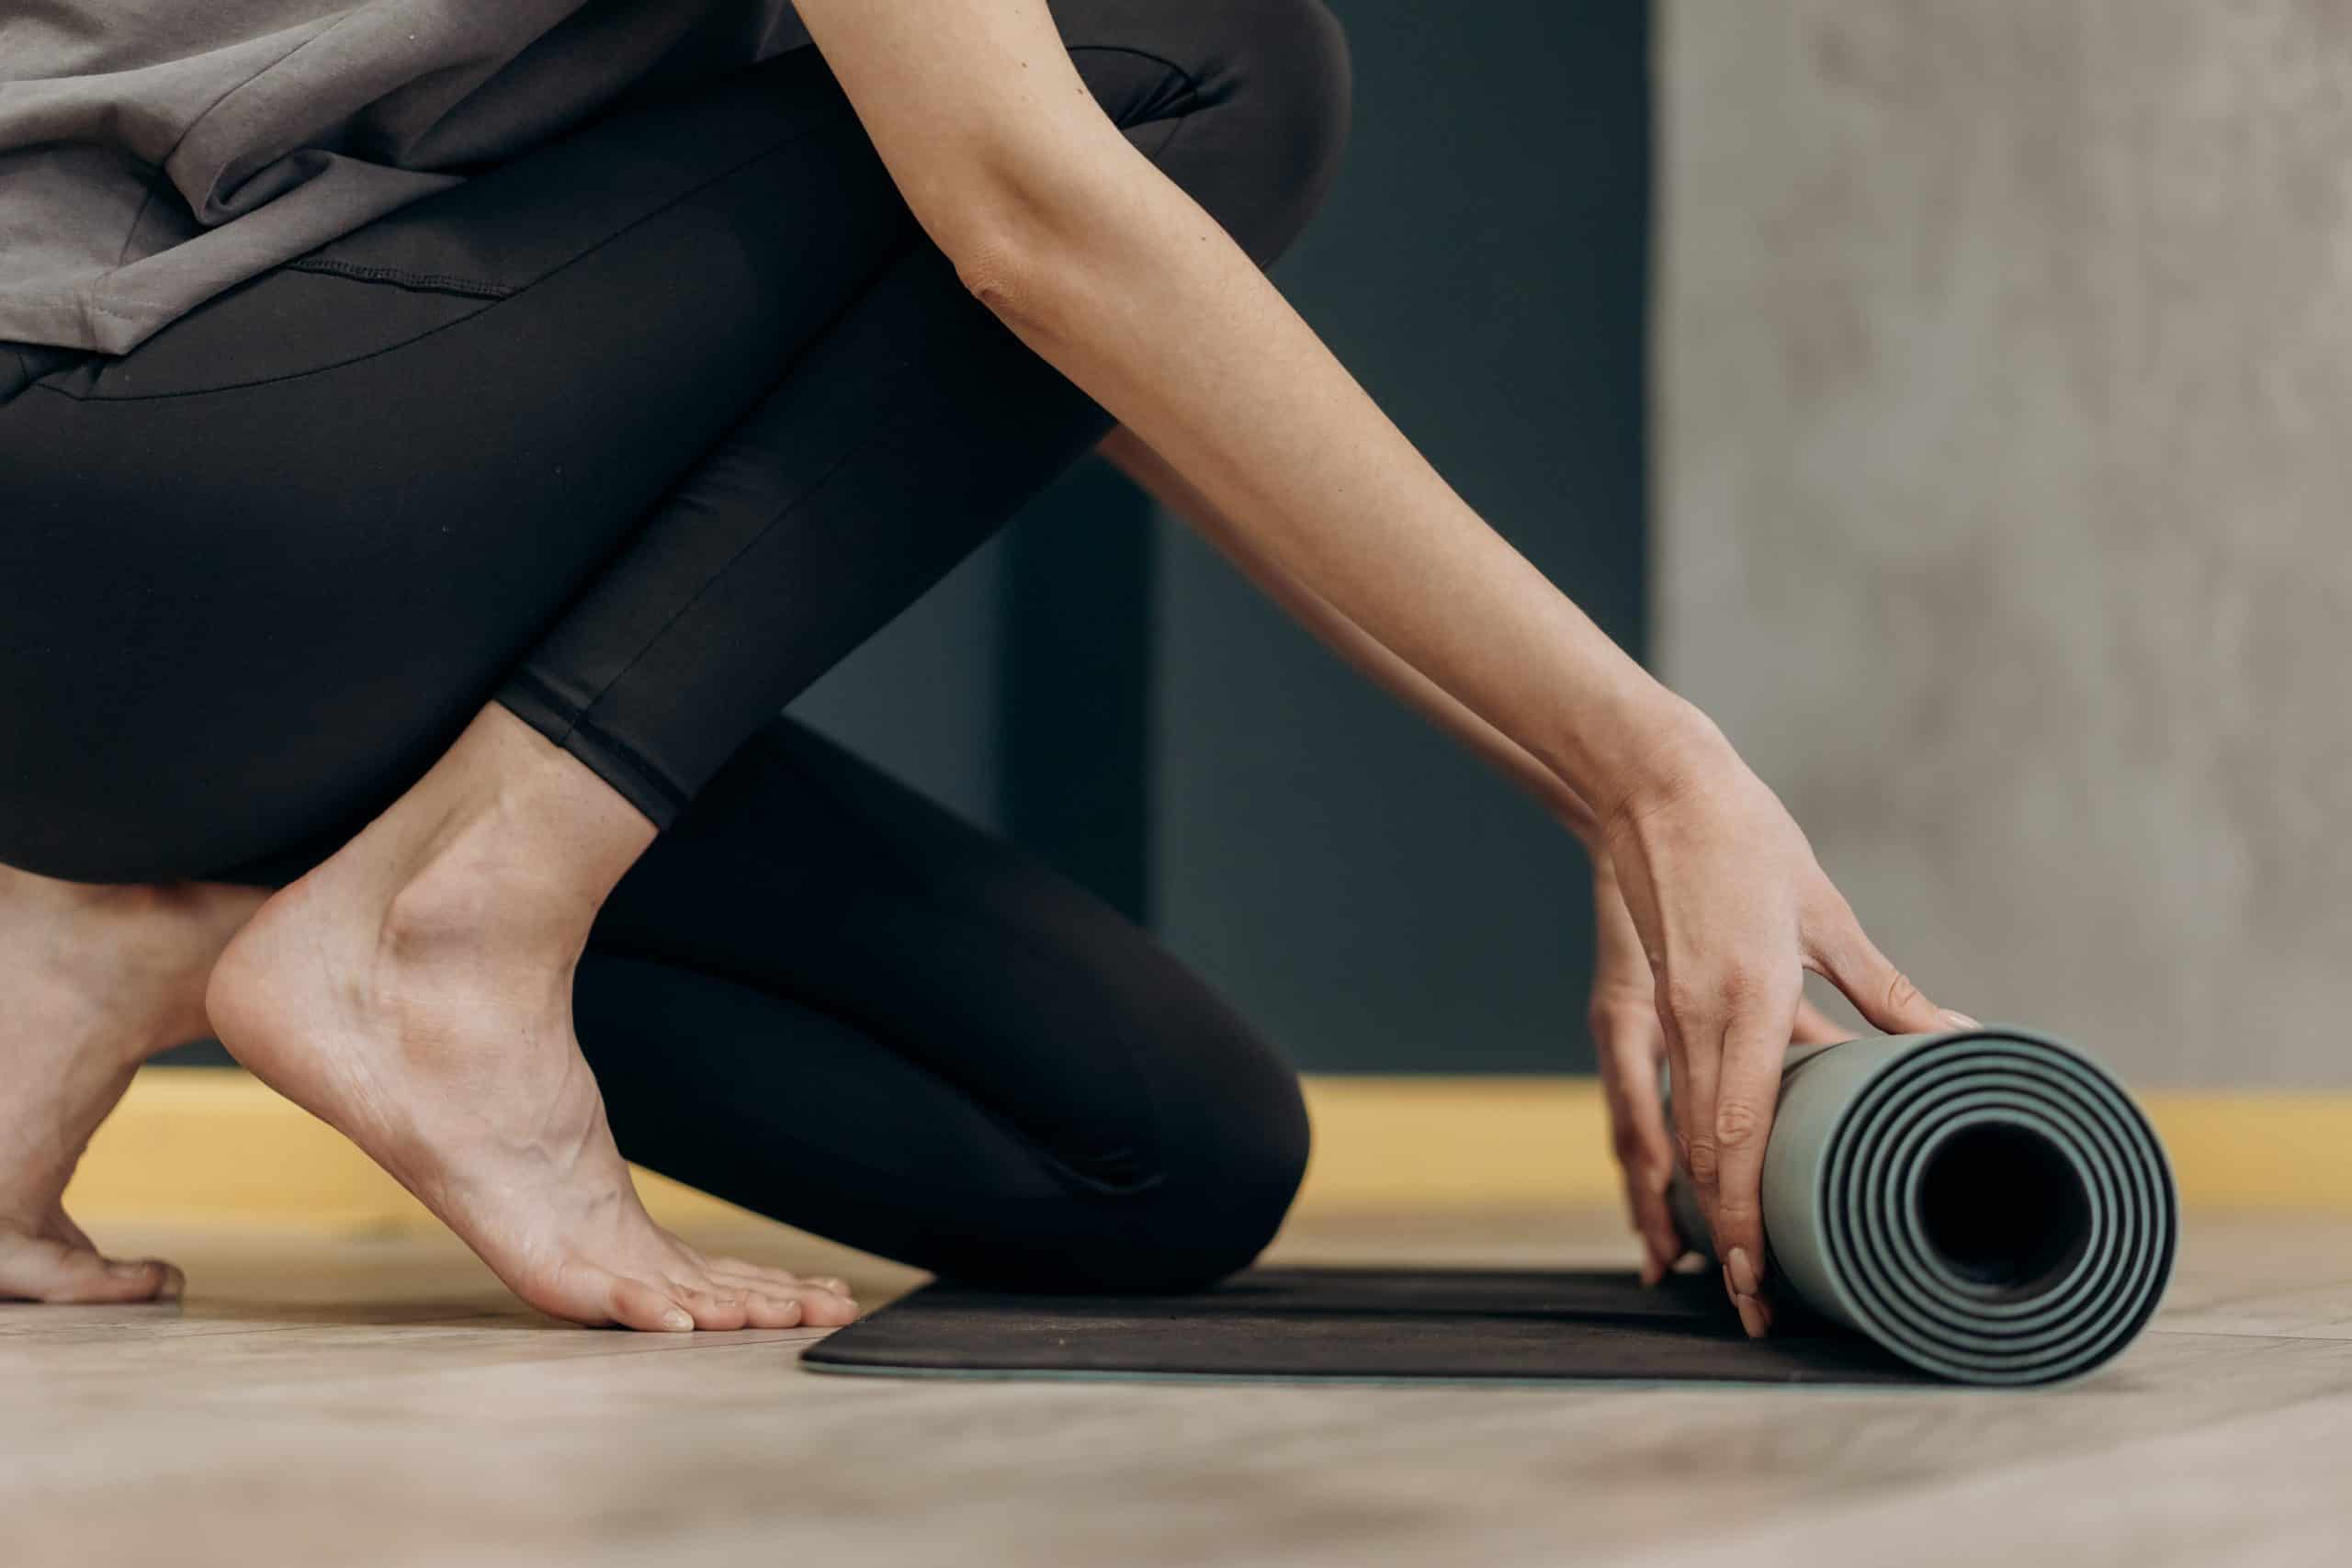  Clever Yoga Mat BetterGrip Eco-Friendly Recyclable